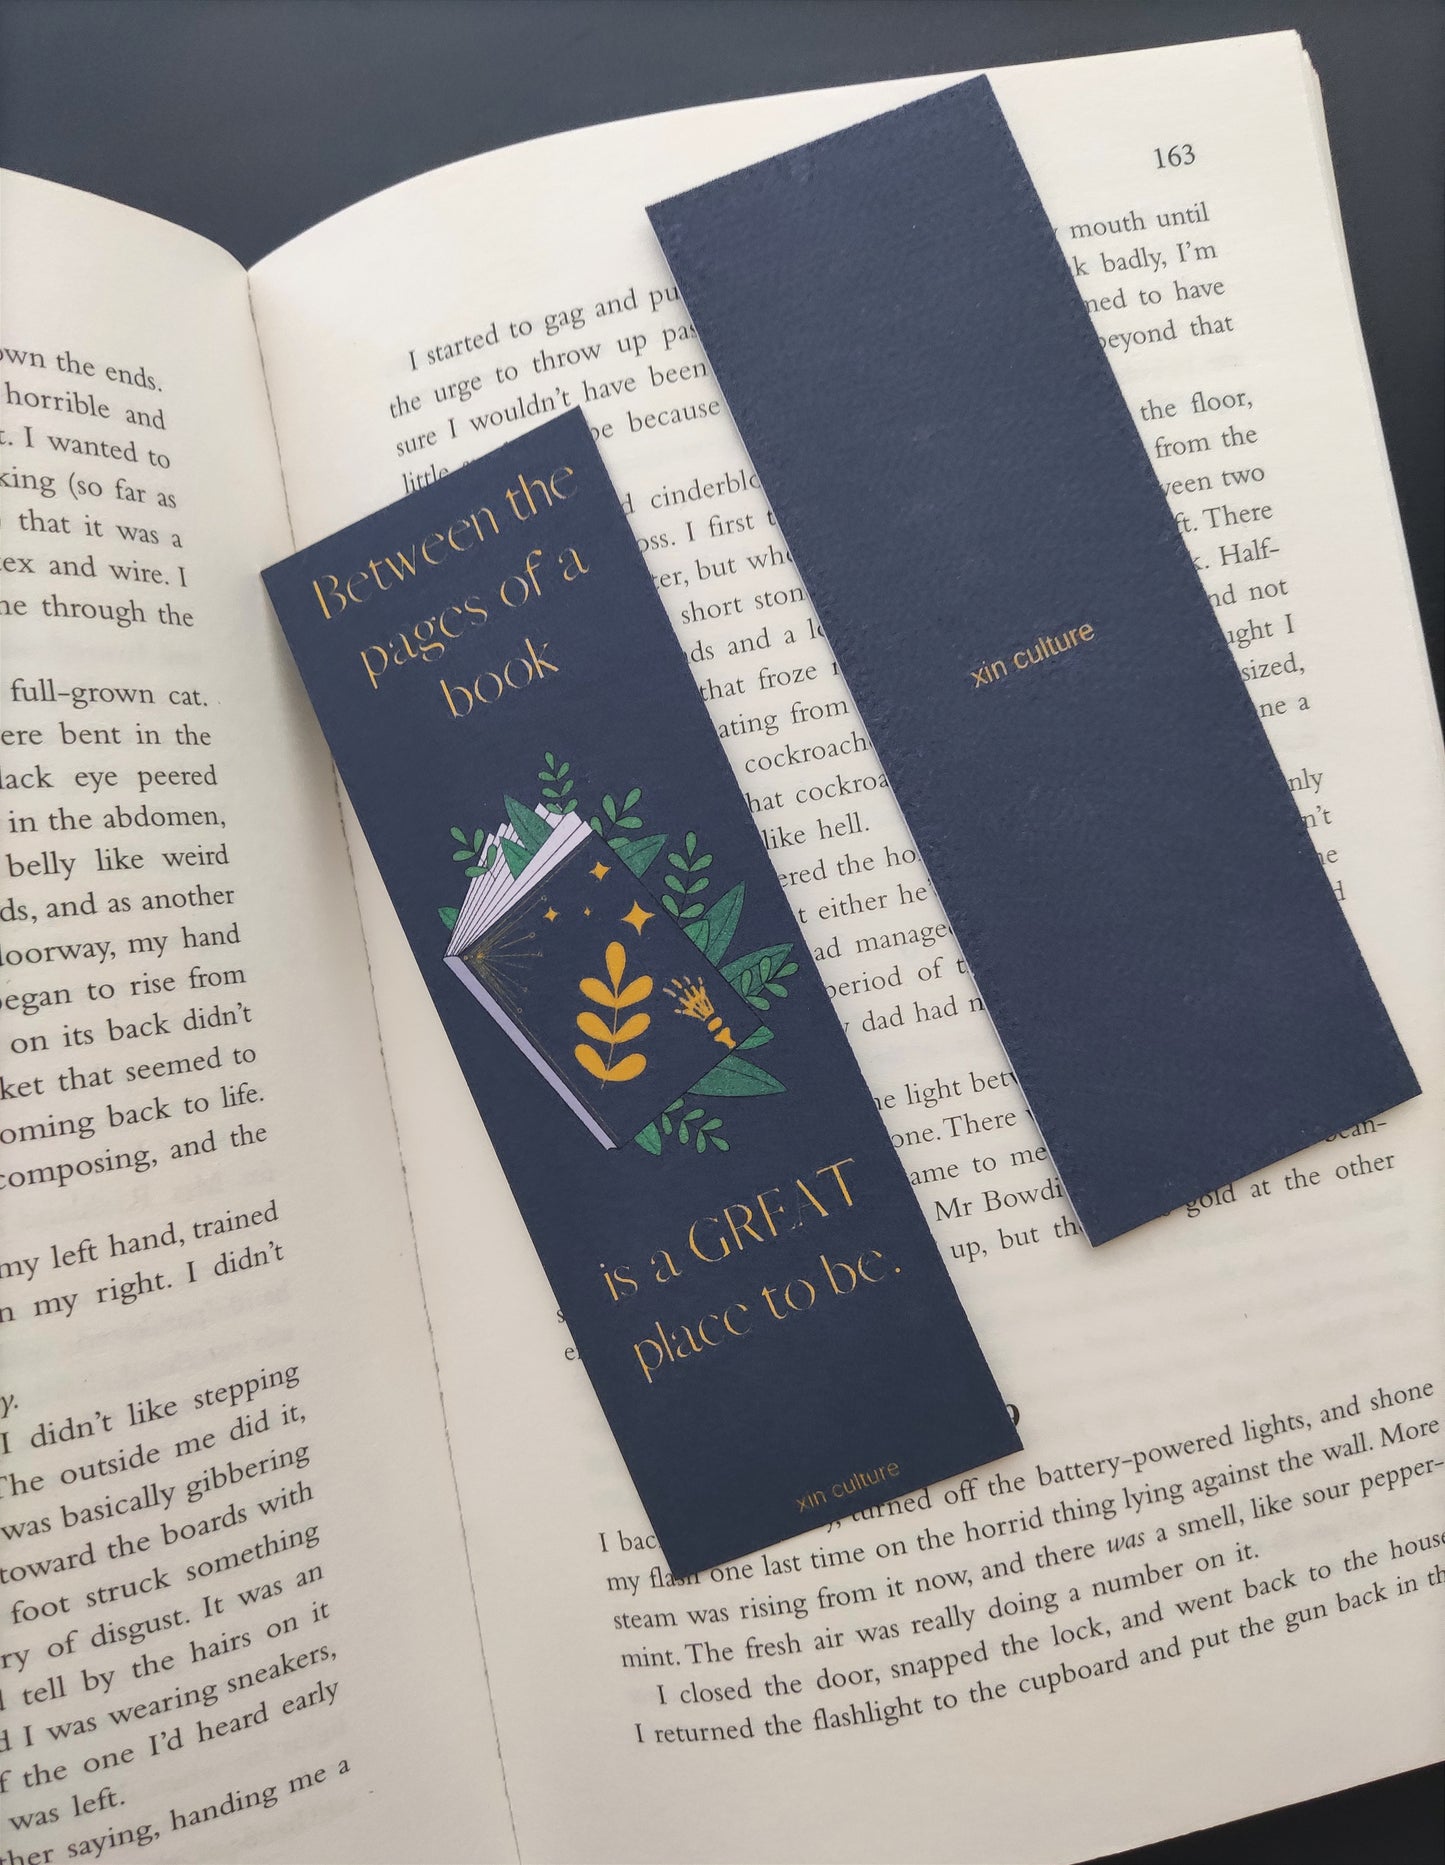 "Between the pages of a book" bookmark